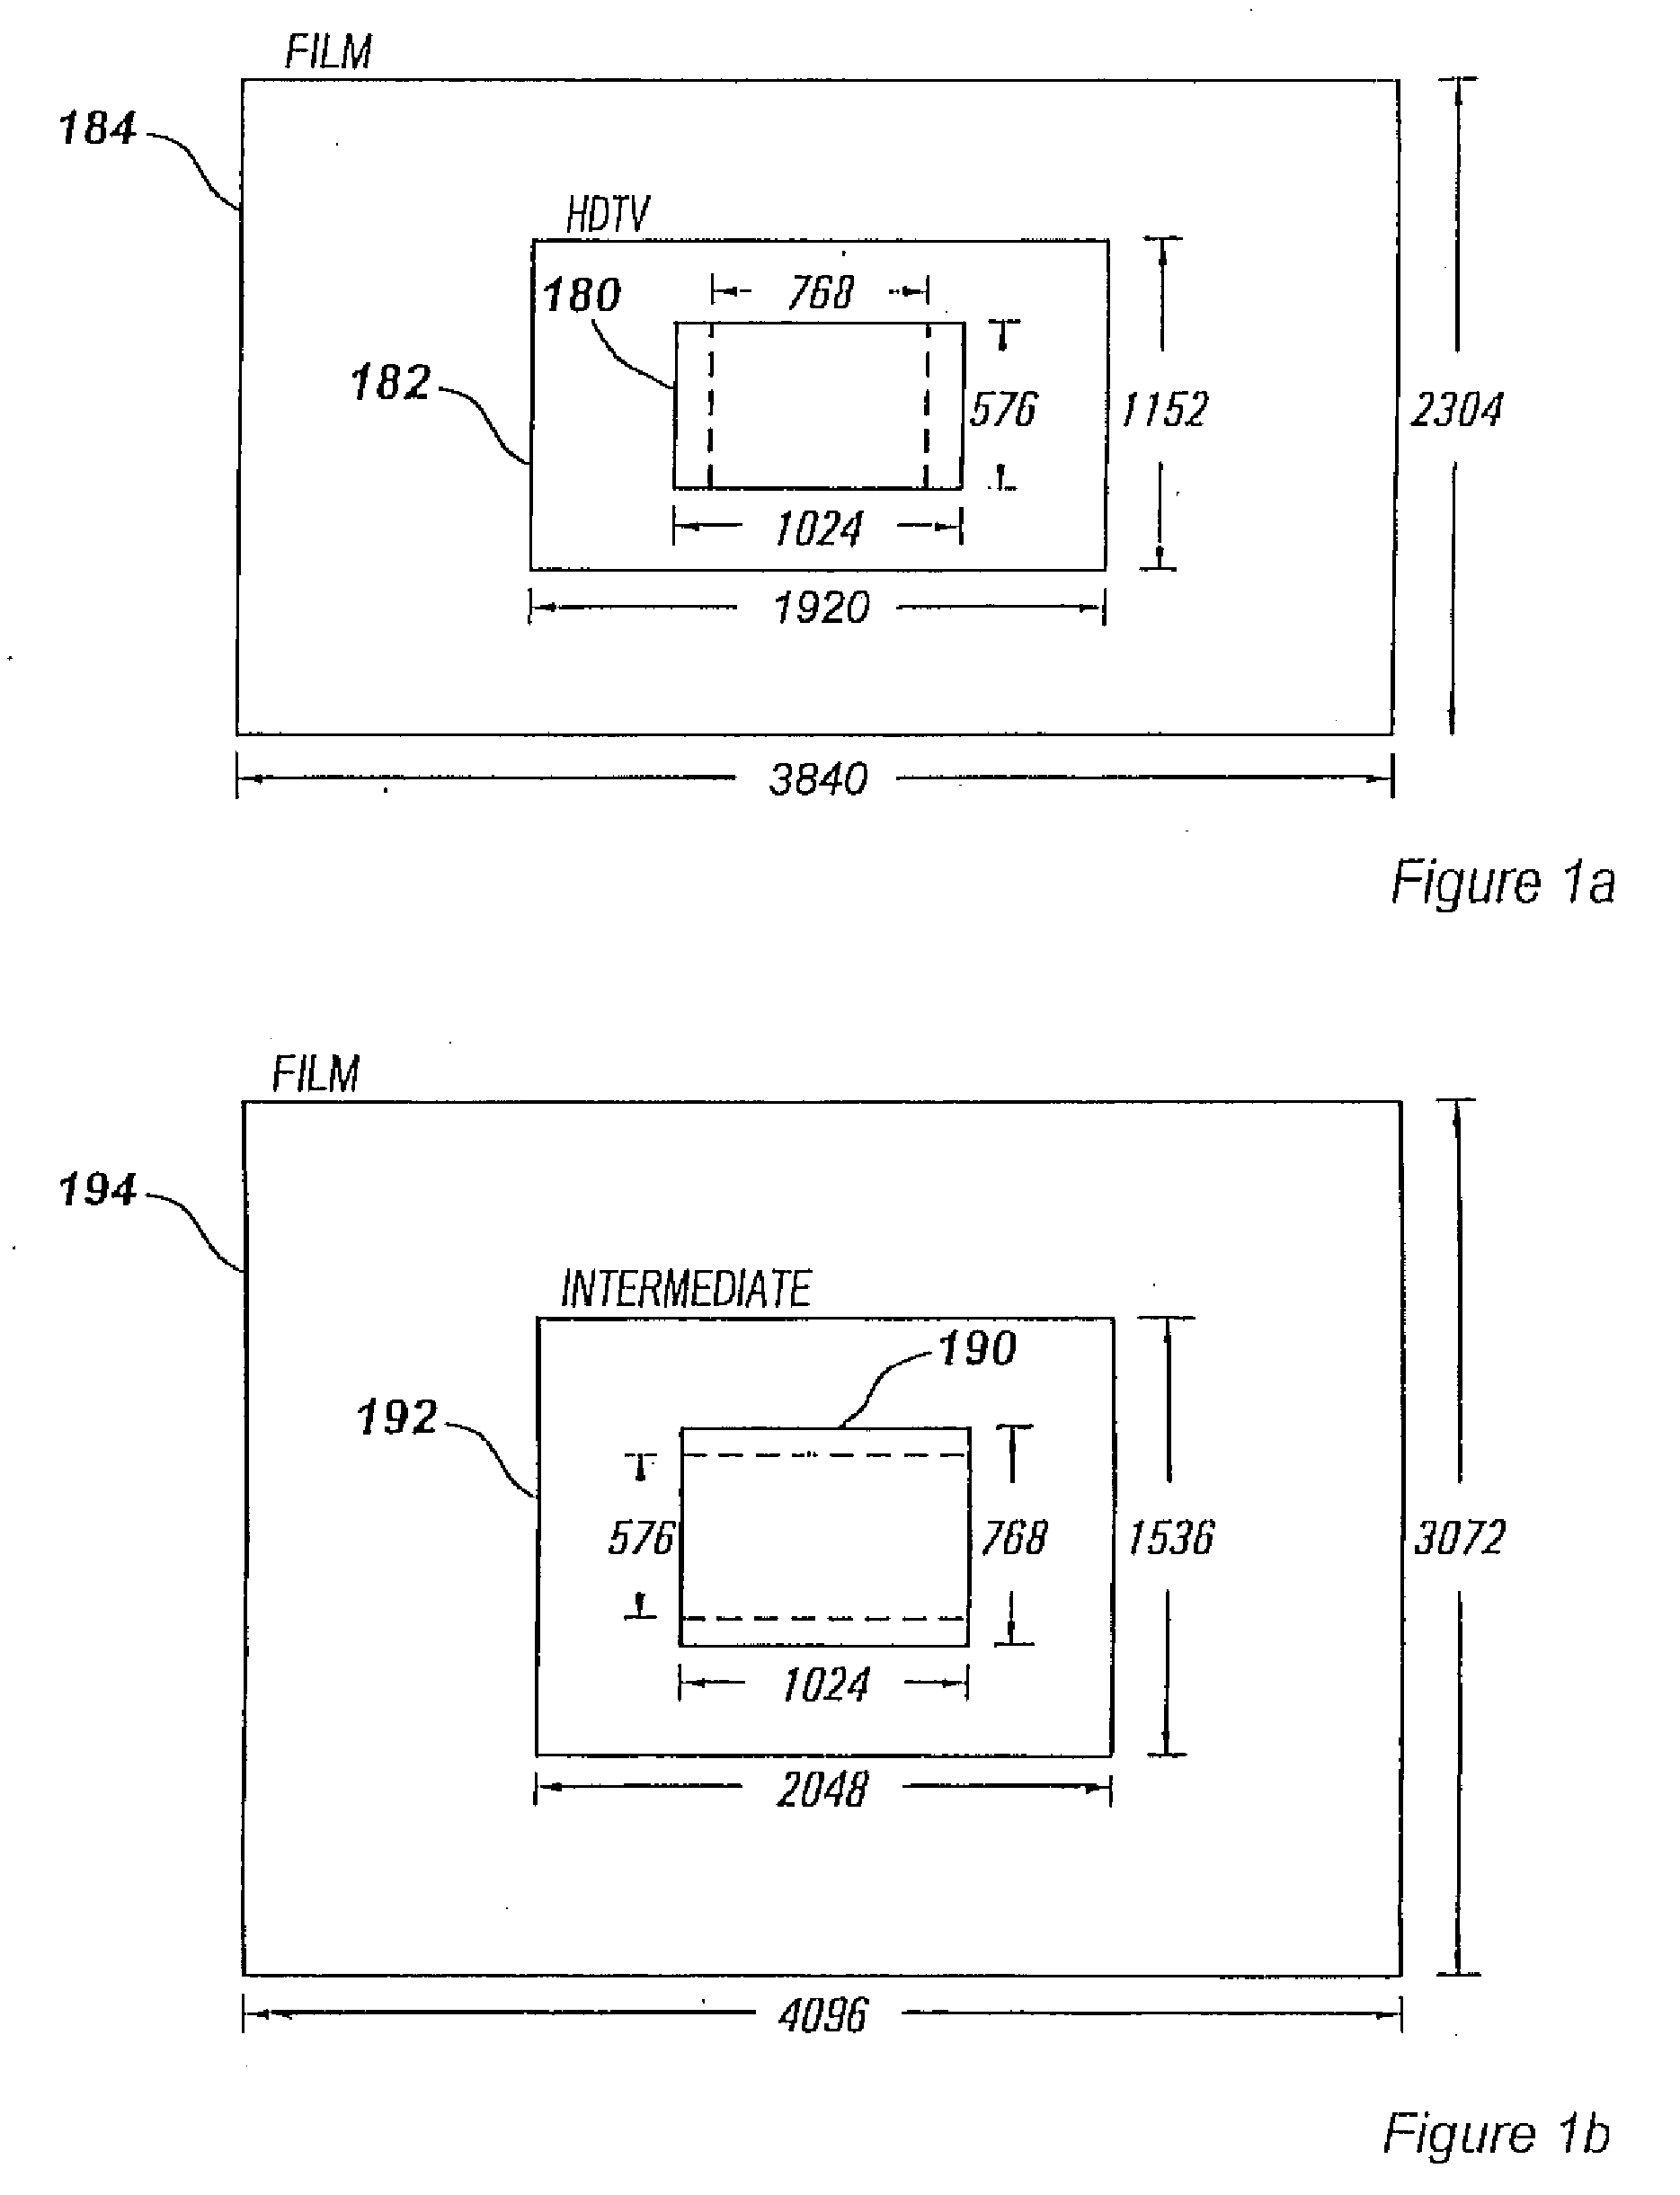 Integrated multi-format audio/video production system